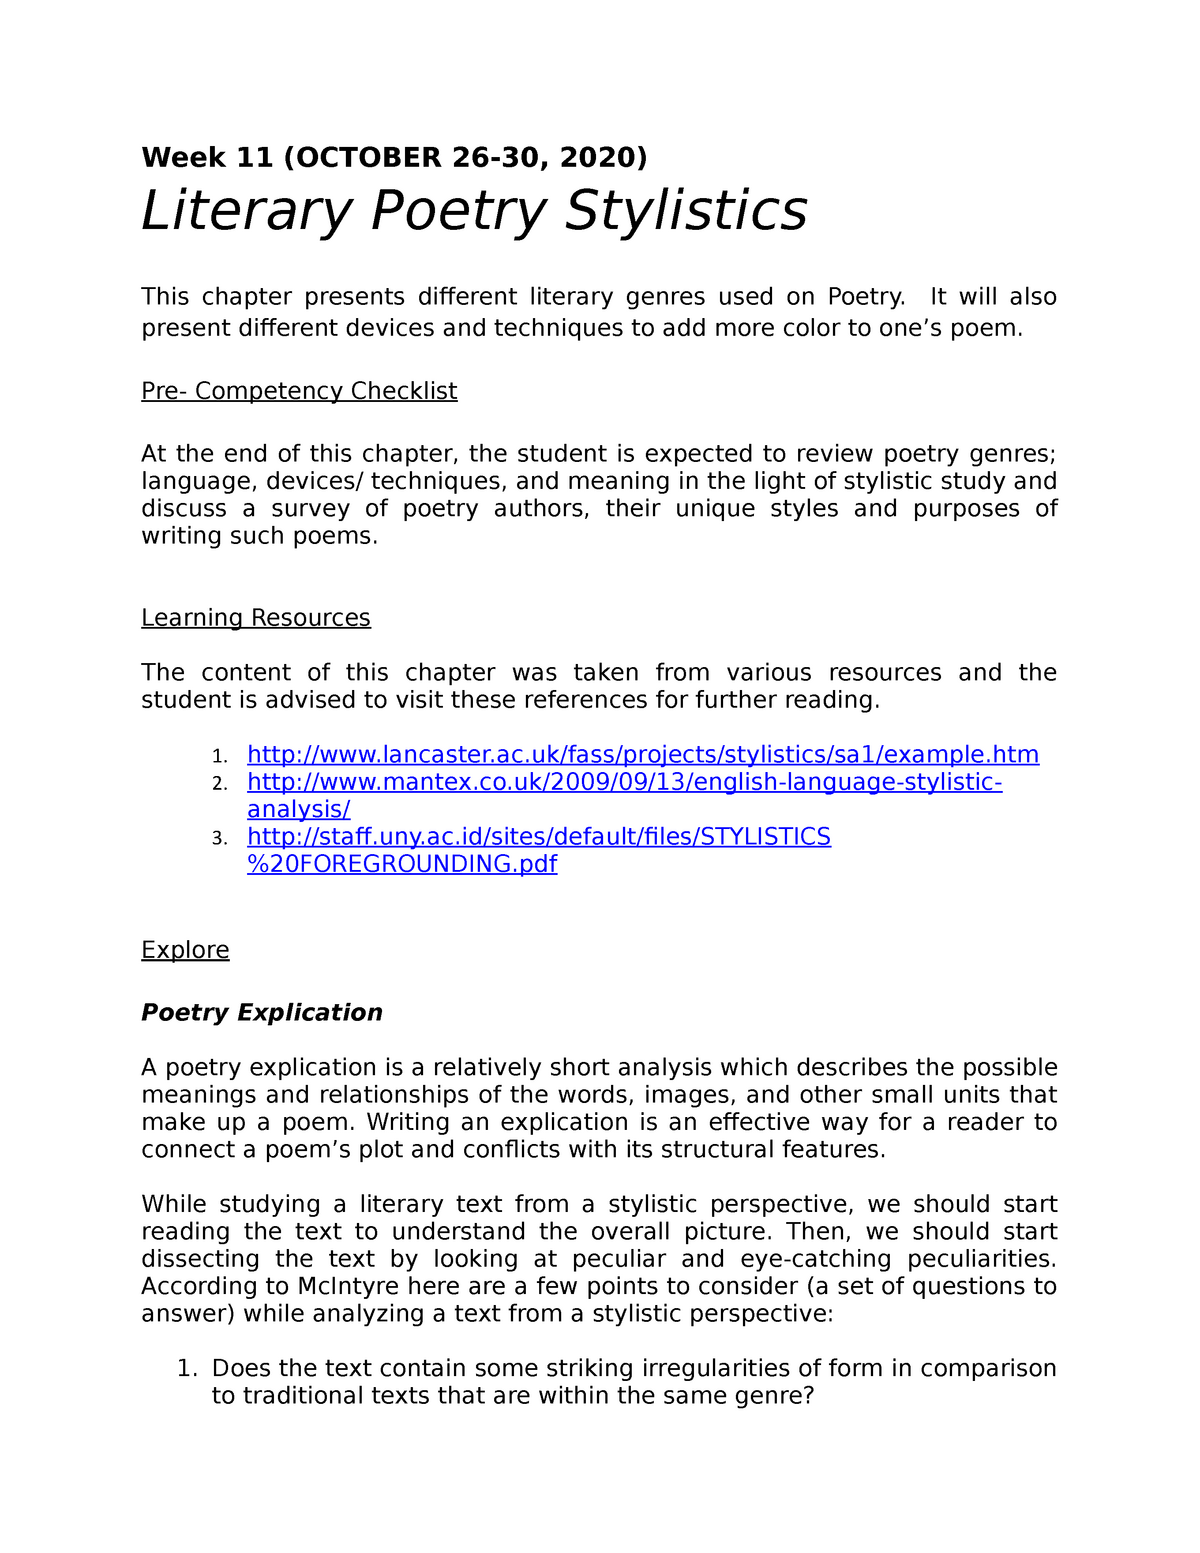 Poetry Explication - This contains the summary for the week 29